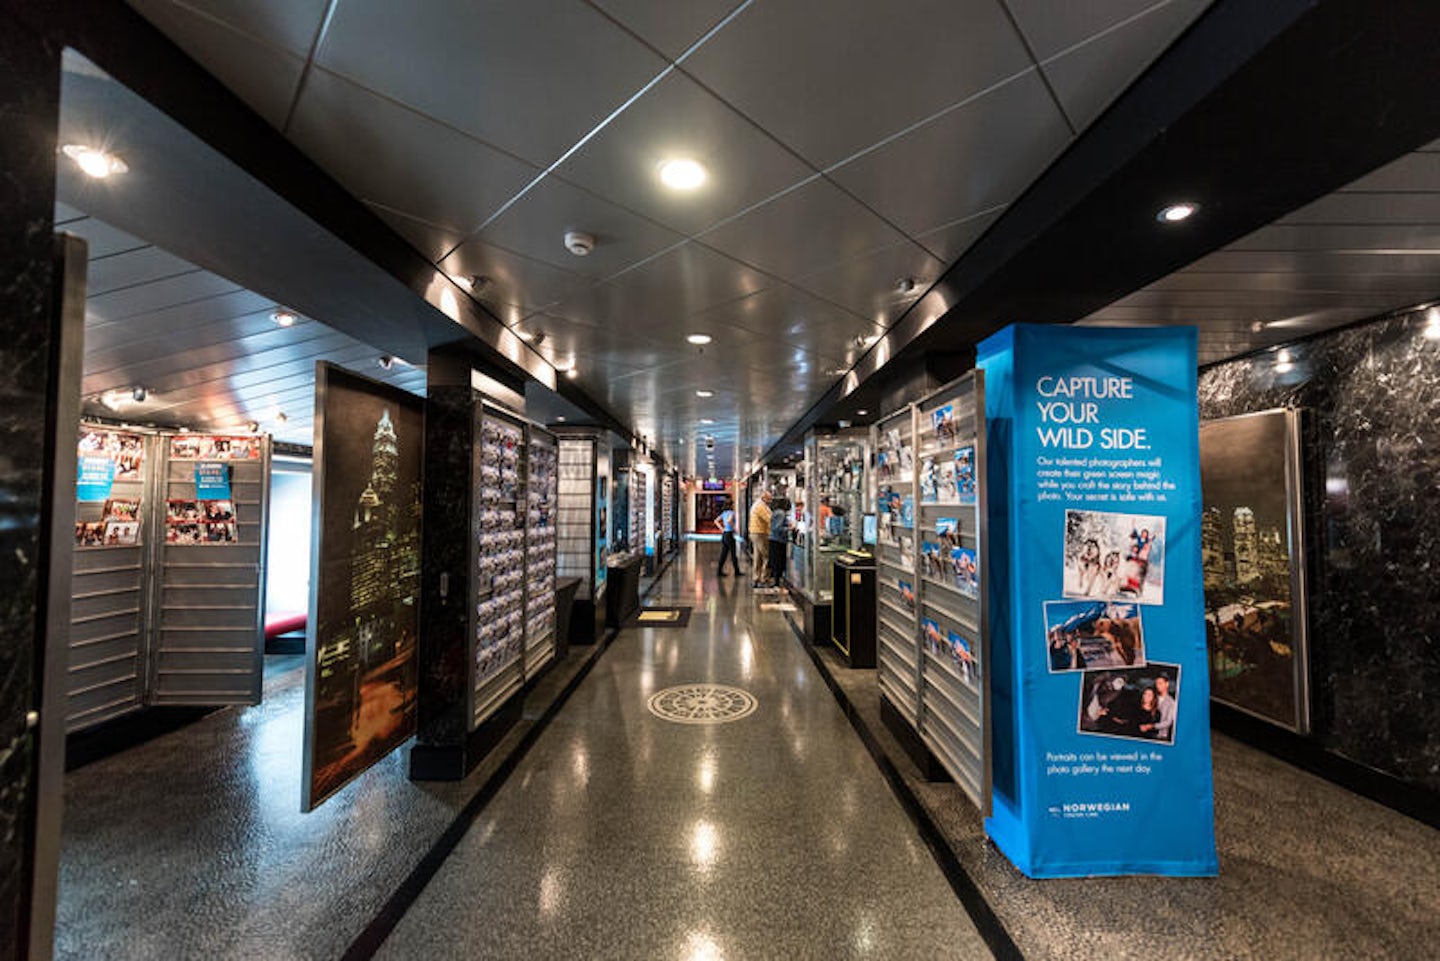 Photo and Video Gallery on Norwegian Pearl